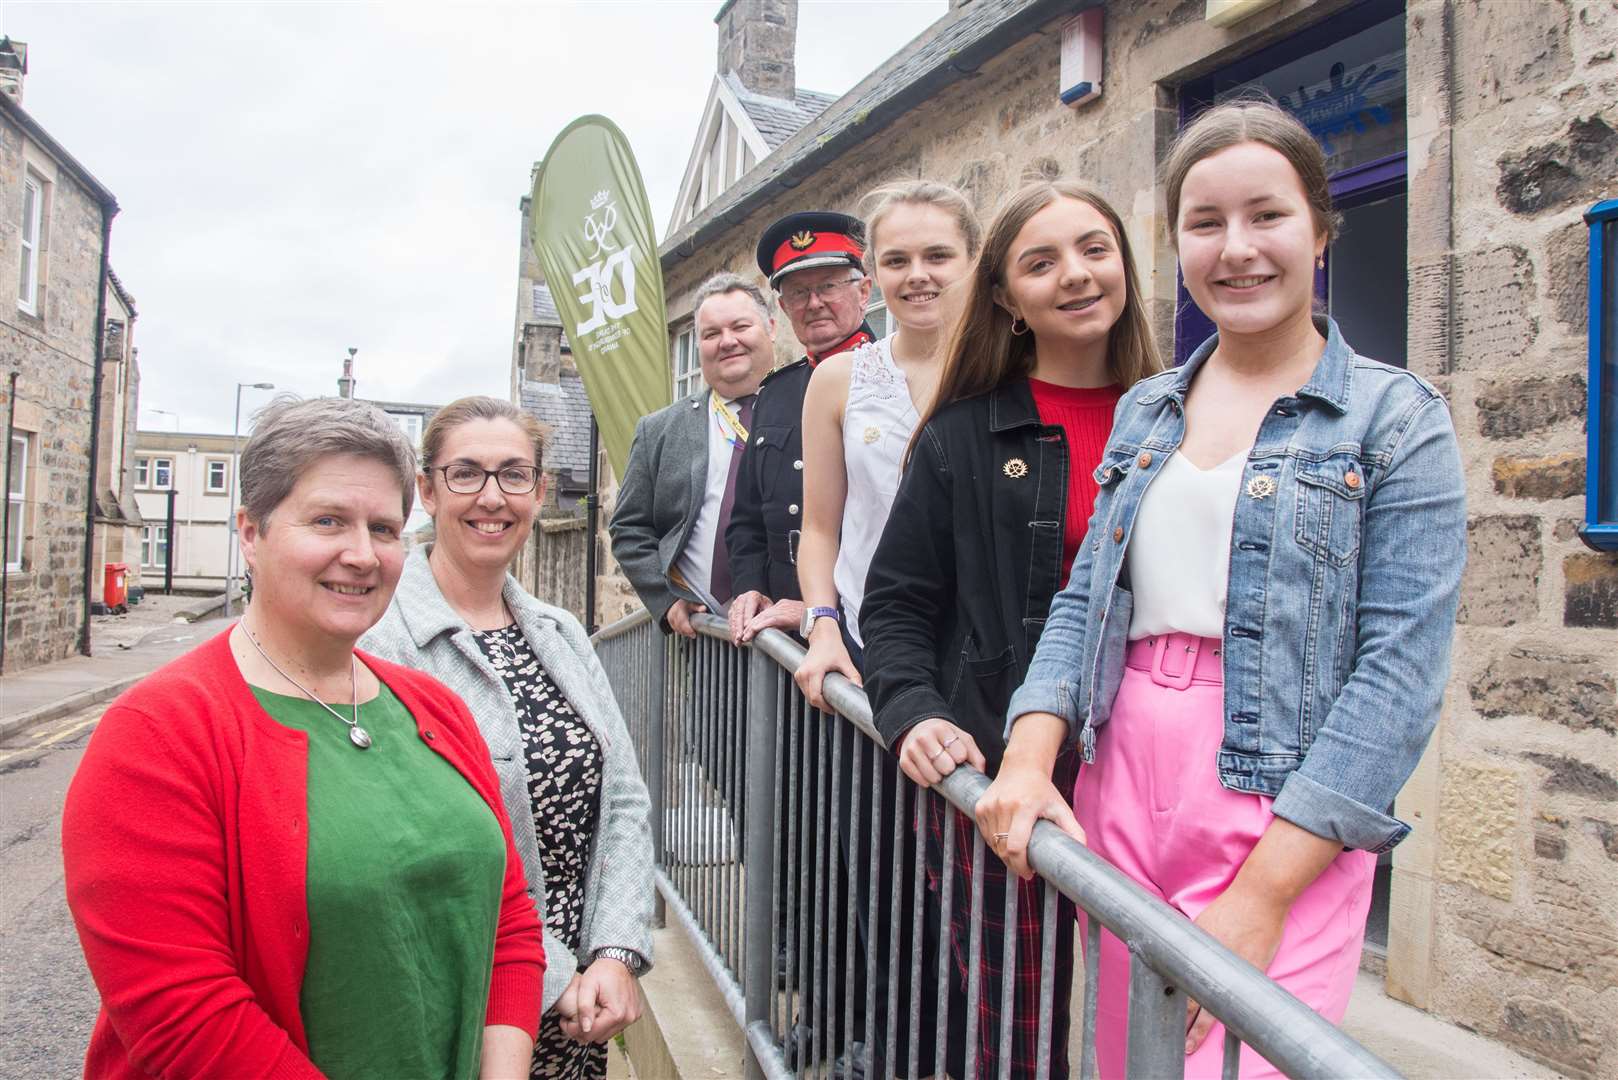 Gold Duke of Edinburgh Award recipients (from right) Mia Slater, Kadie Smith and Kathryn Barr with outgoing volunteers (from left) Heather Gray and Stacey Hamilton. Moray's Lord Lieutenant Grenville Johnston addressed the award's ceremony, as did Moray Council leader Graham Leadbitter.